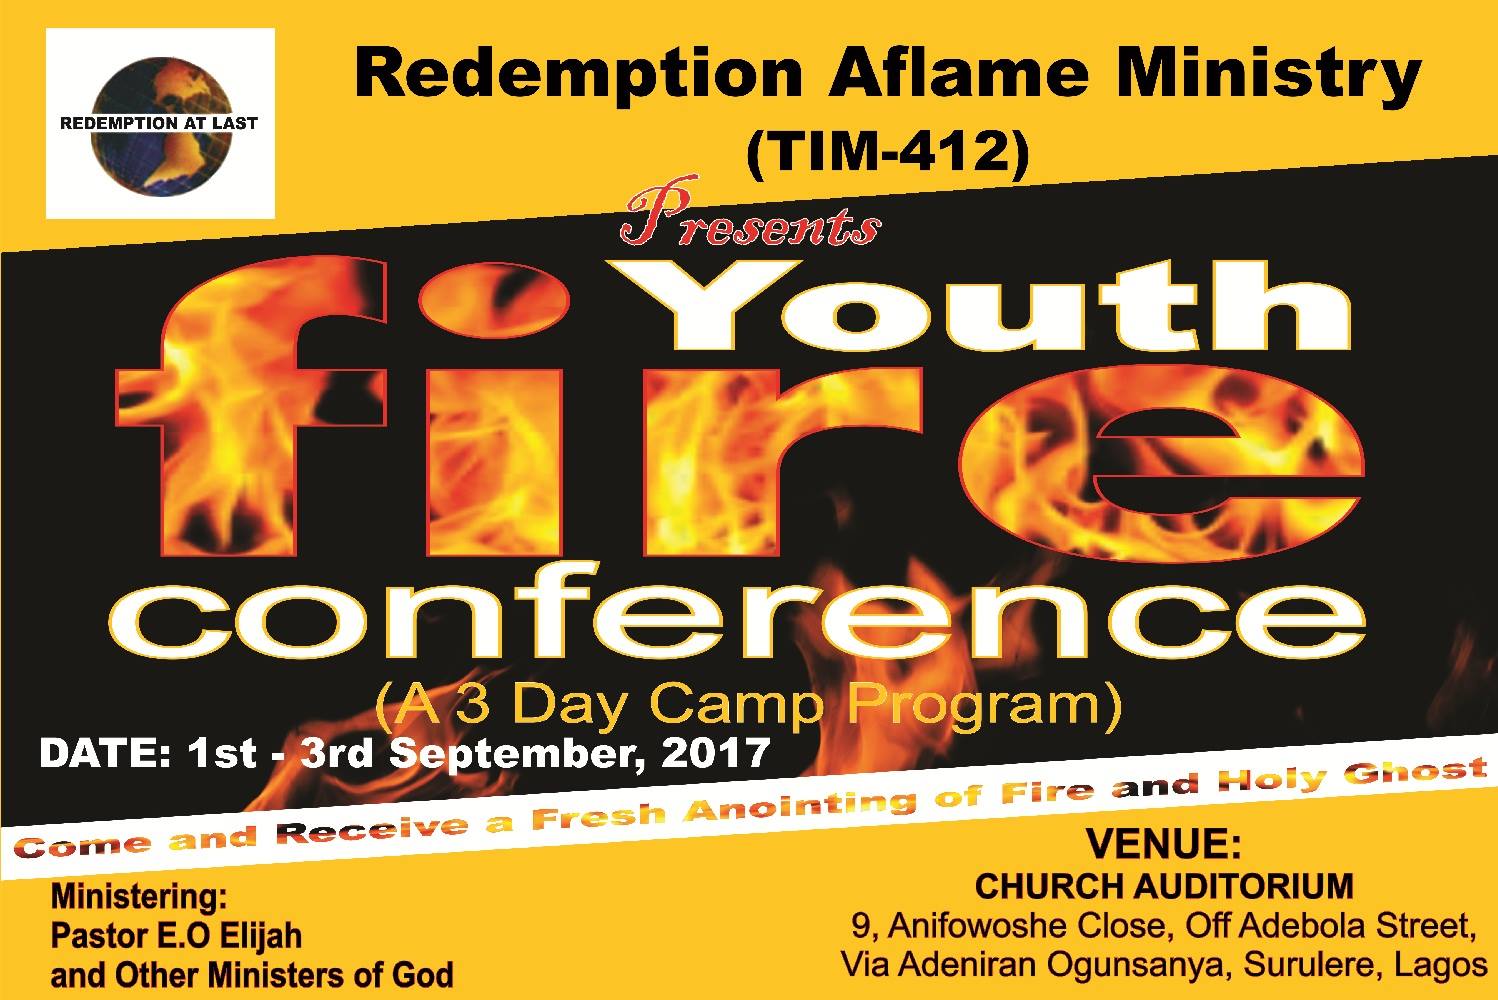 Youth Fire Conference